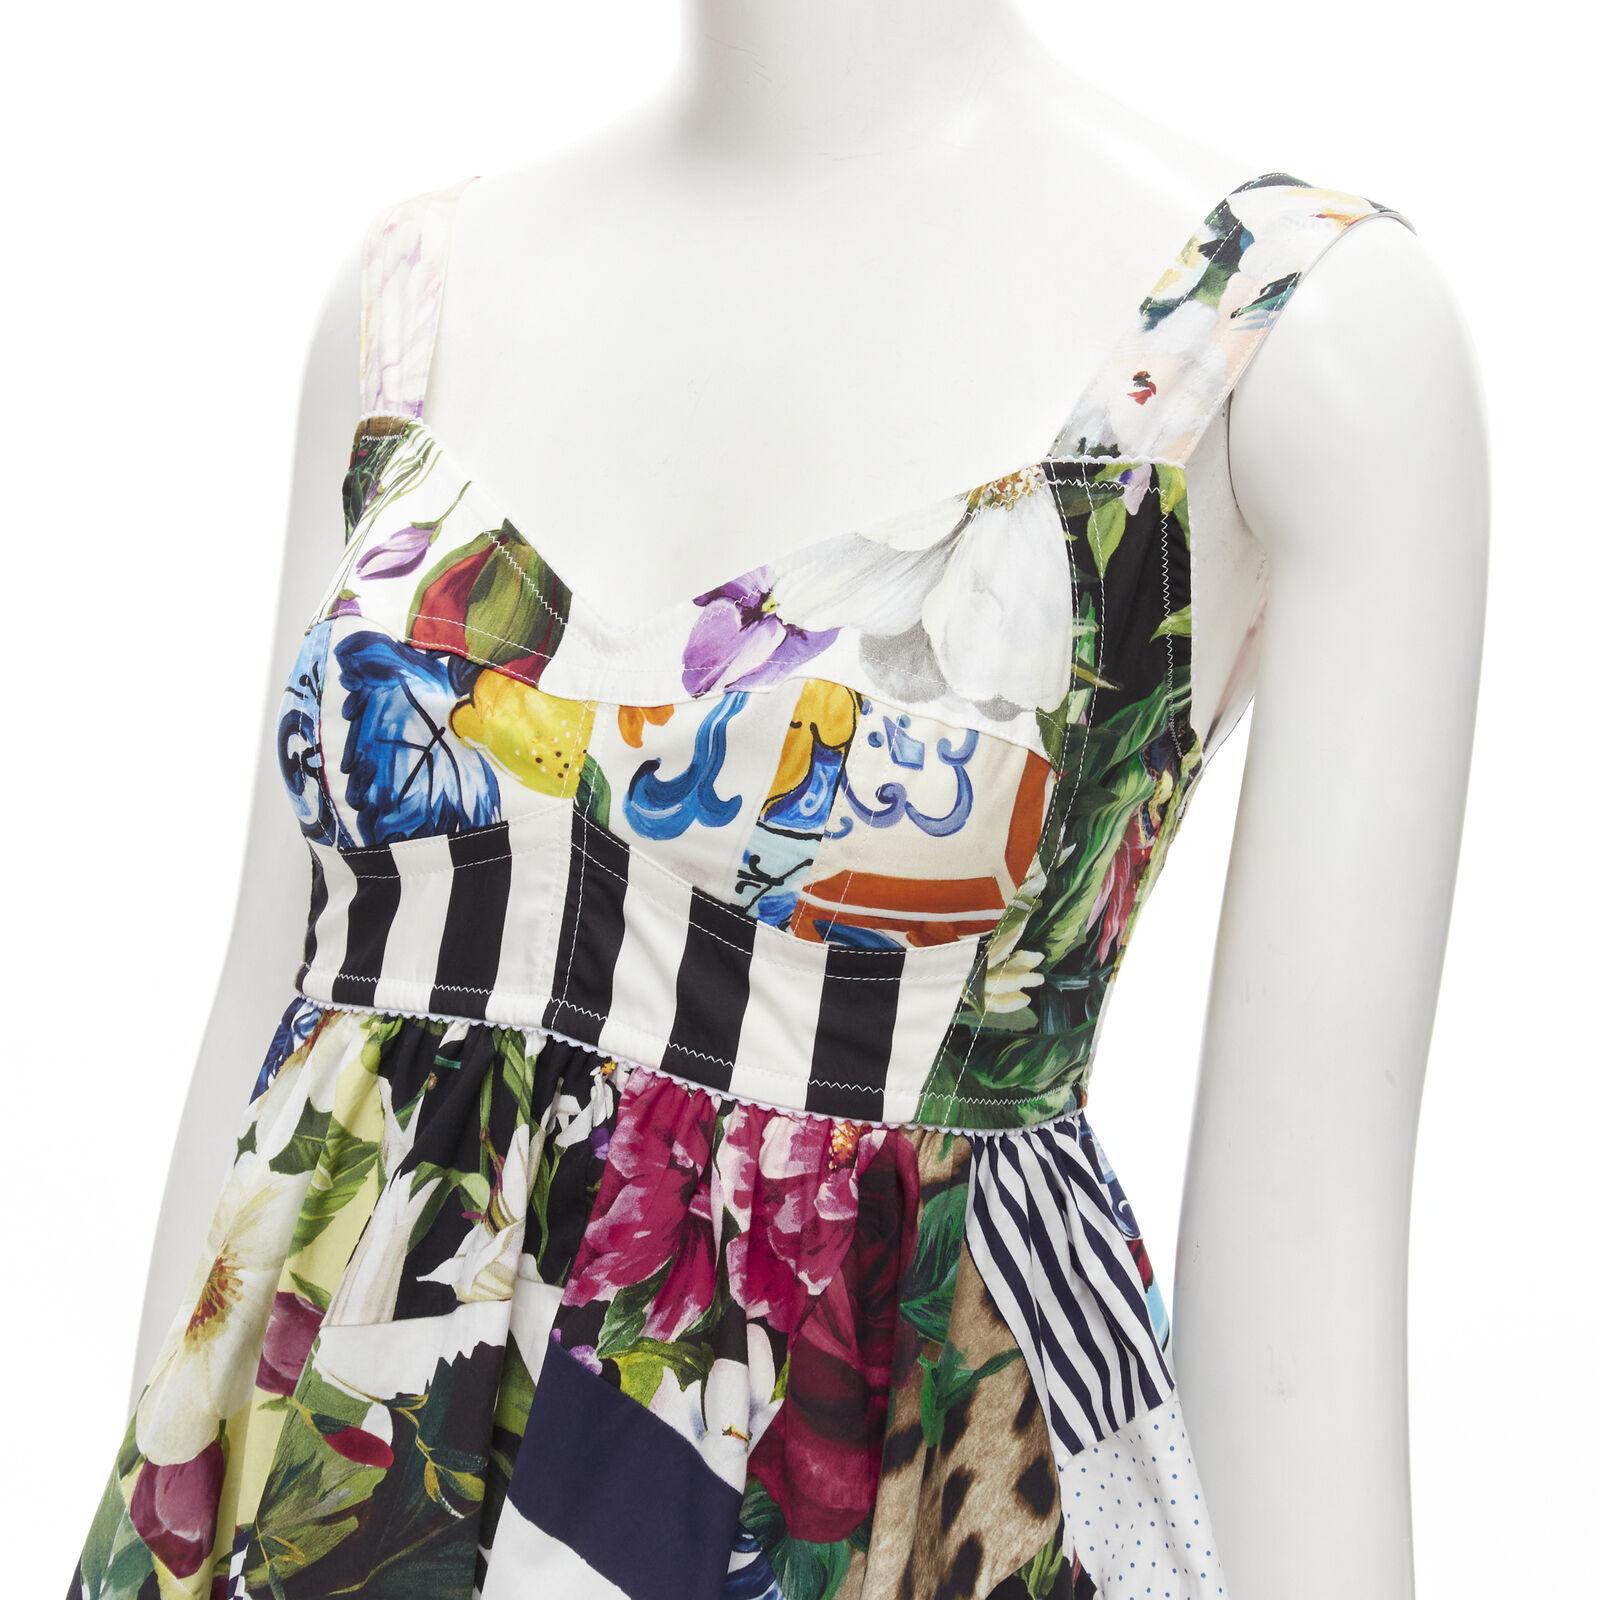 DOLCE GABBANA 2021 mixed patchwork floral boned bustier flared dress IT38 XS
Reference: AAWC/A00061
Brand: Dolce Gabbana
Designer: Domenico Dolce and Stefano Gabbana
Material: Cotton
Color: Multicolour
Pattern: Floral
Closure: Zip
Extra Details: